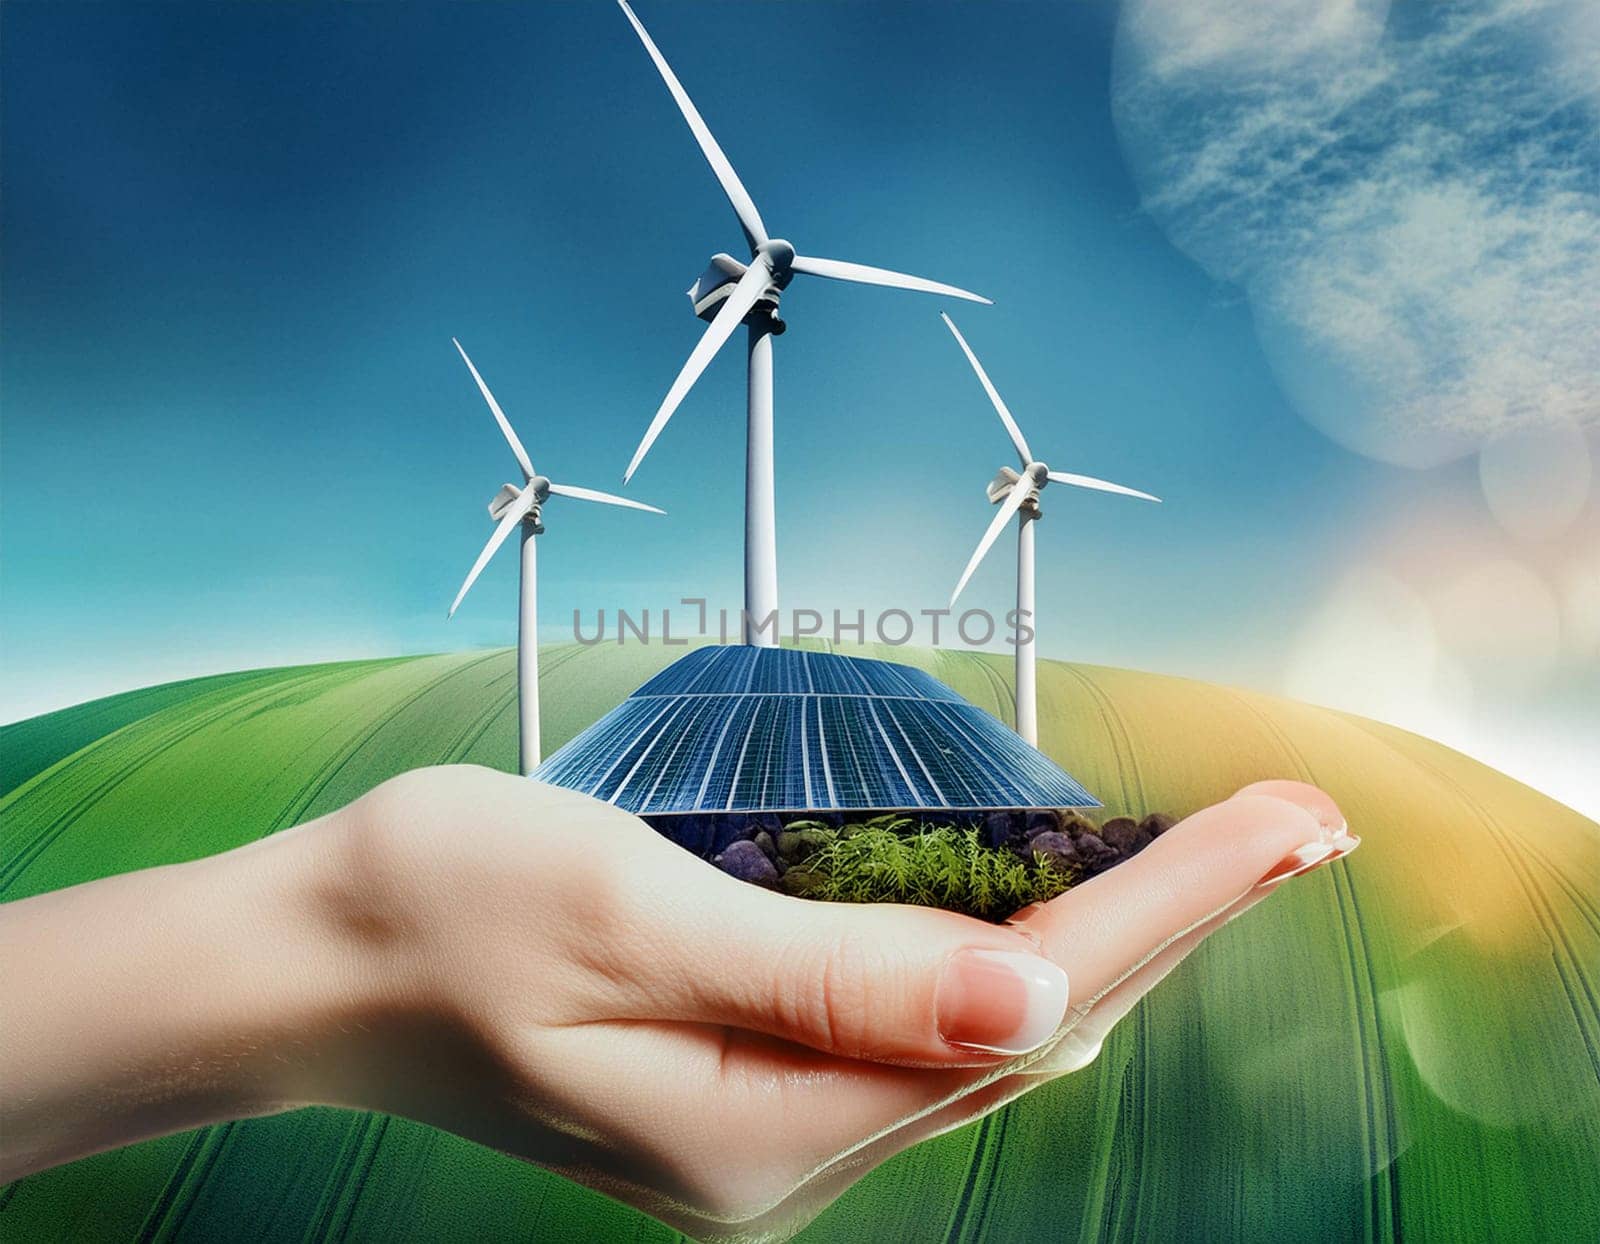 Wind turbines and solar panels in human hands.
Renewable energy by JFsPic